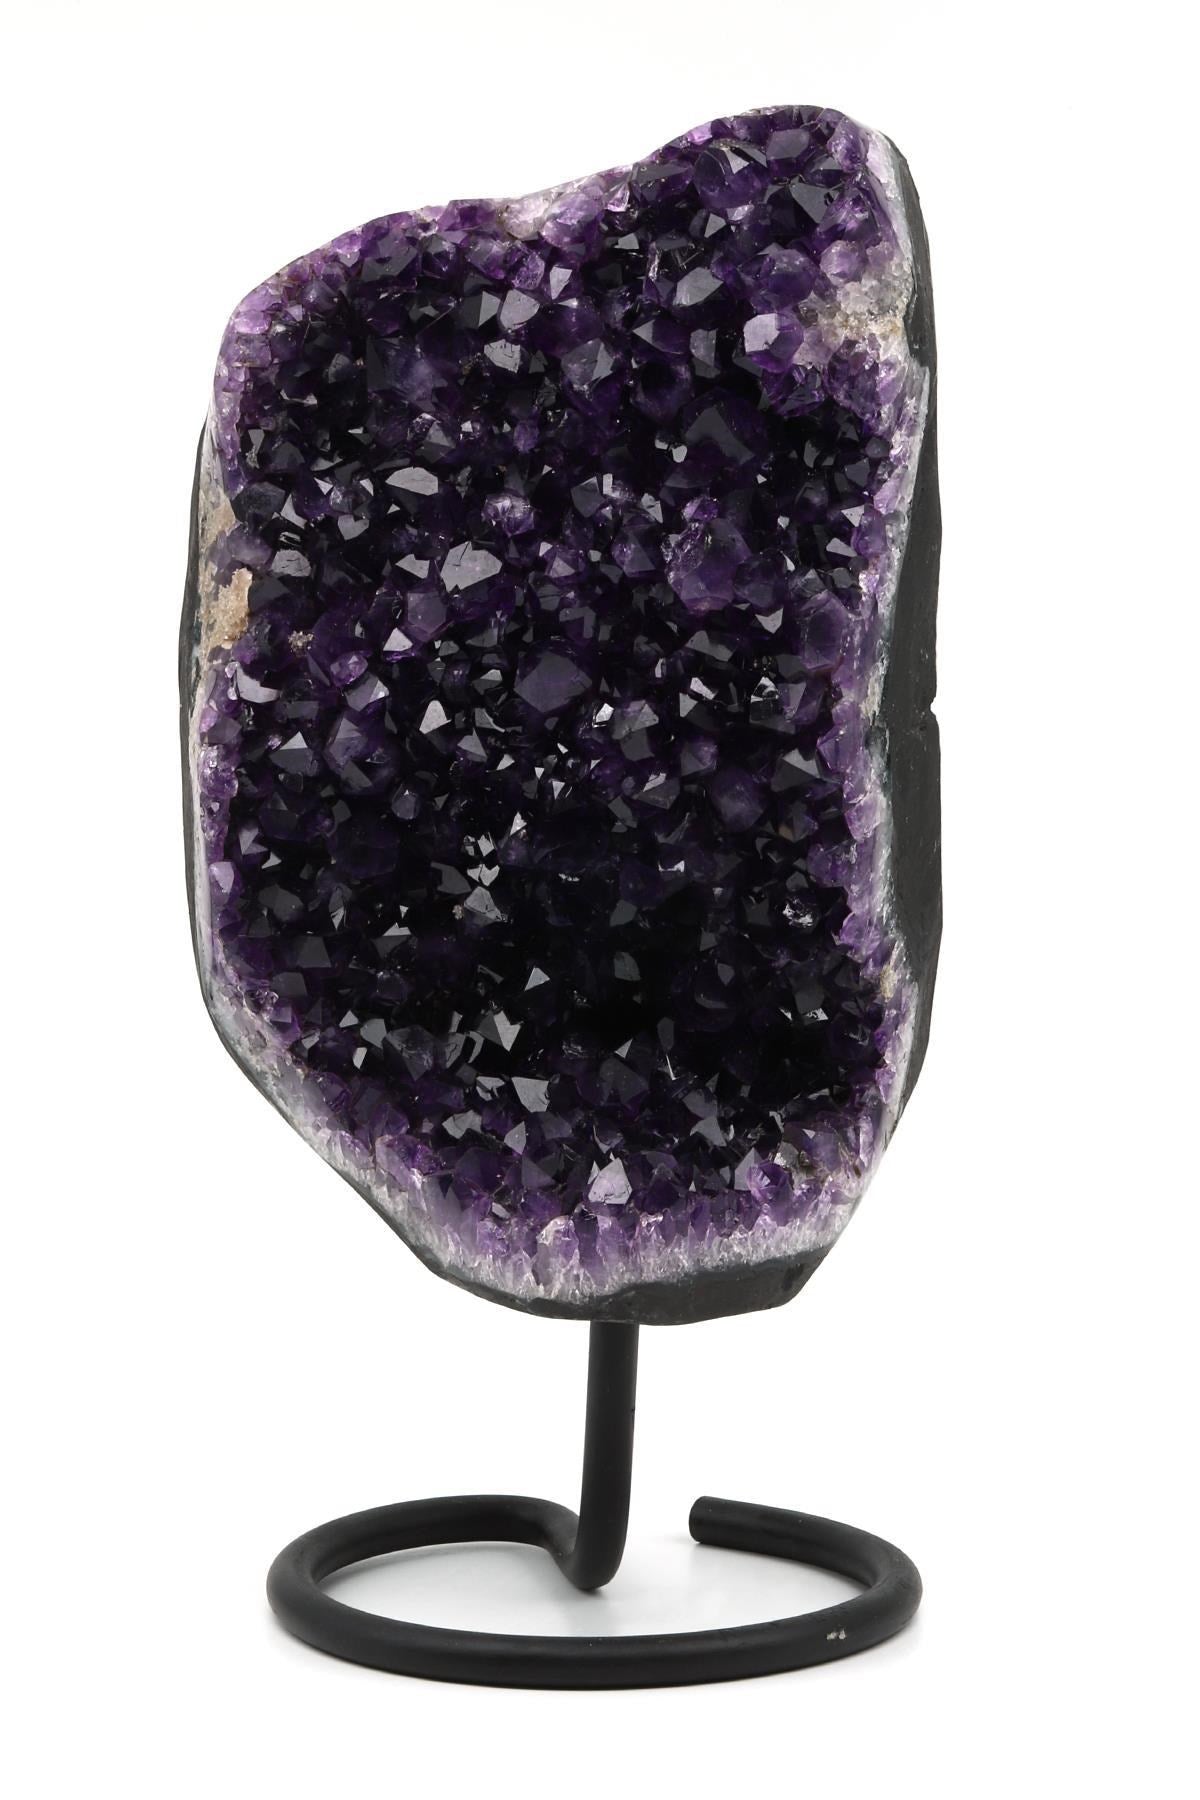 Large Brazilian Amethyst Geode with Stand